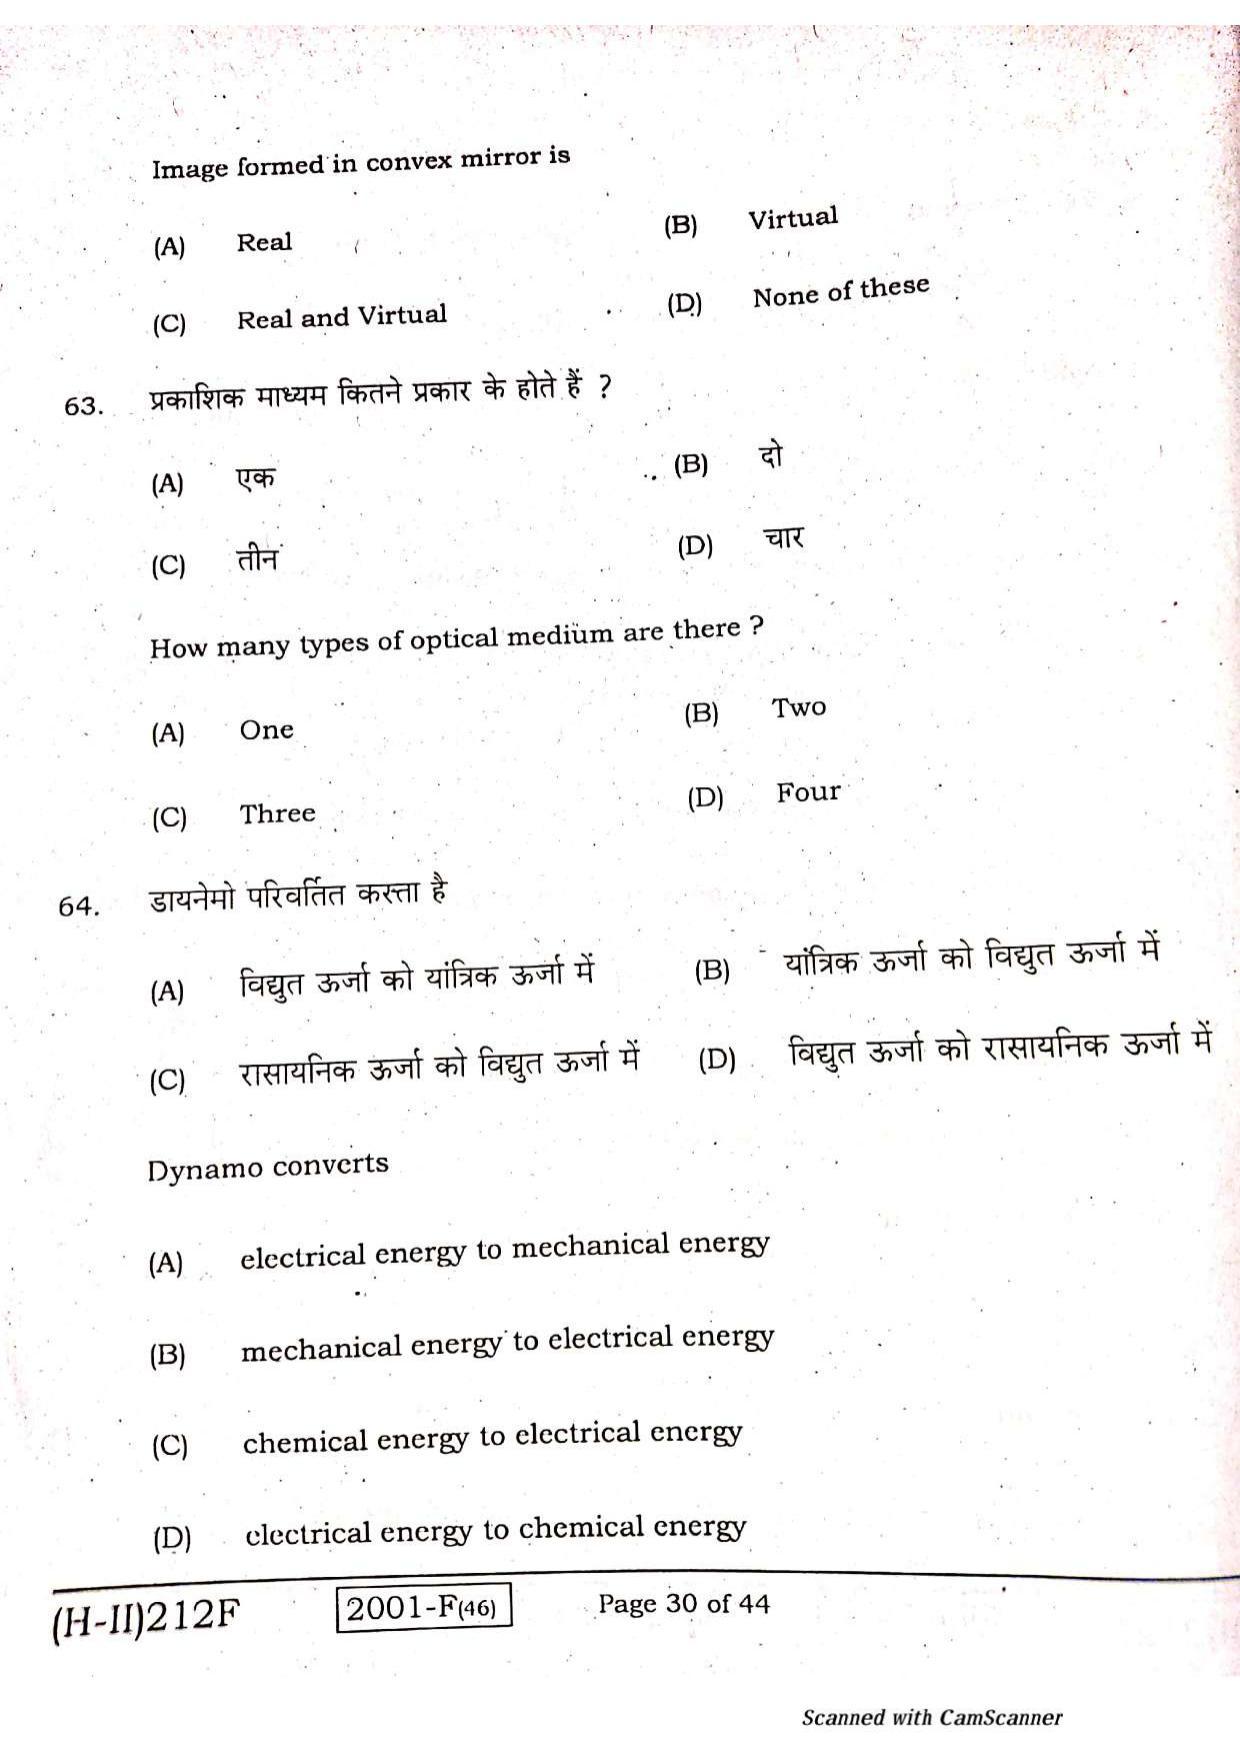 Bihar Board Class 10 Science 2021 (2nd Sitting) Question Paper - Page 28